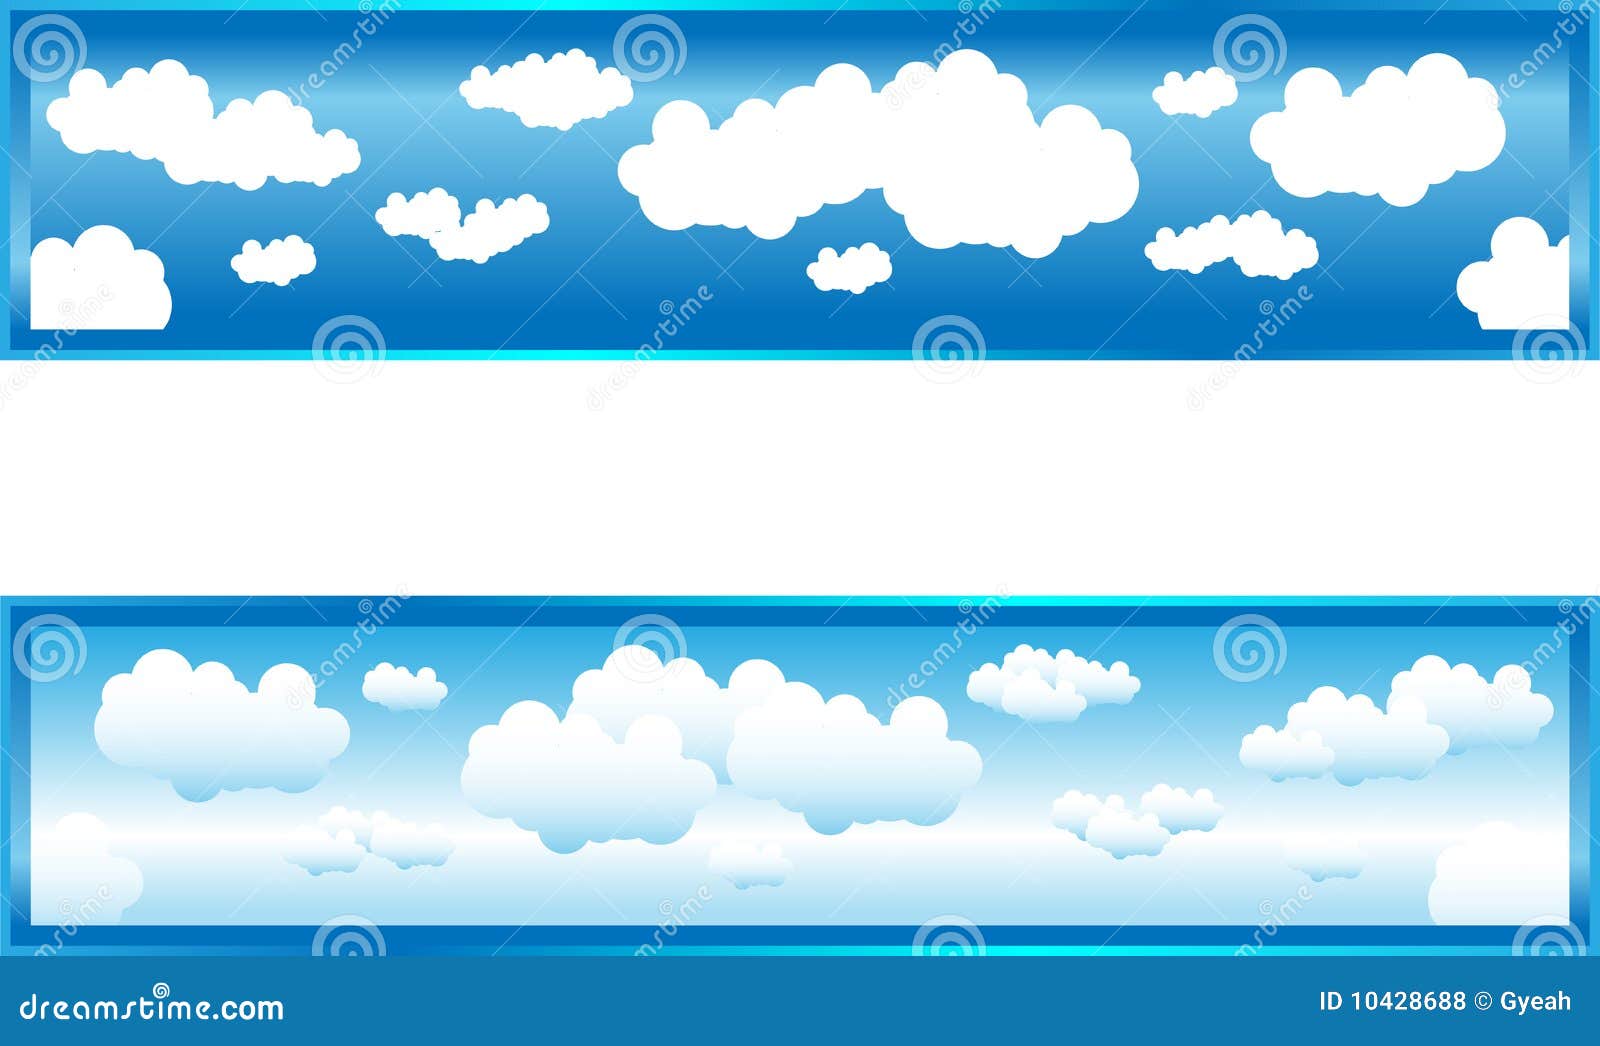 Clouds Royalty Free Stock Photos - Image: 10428688